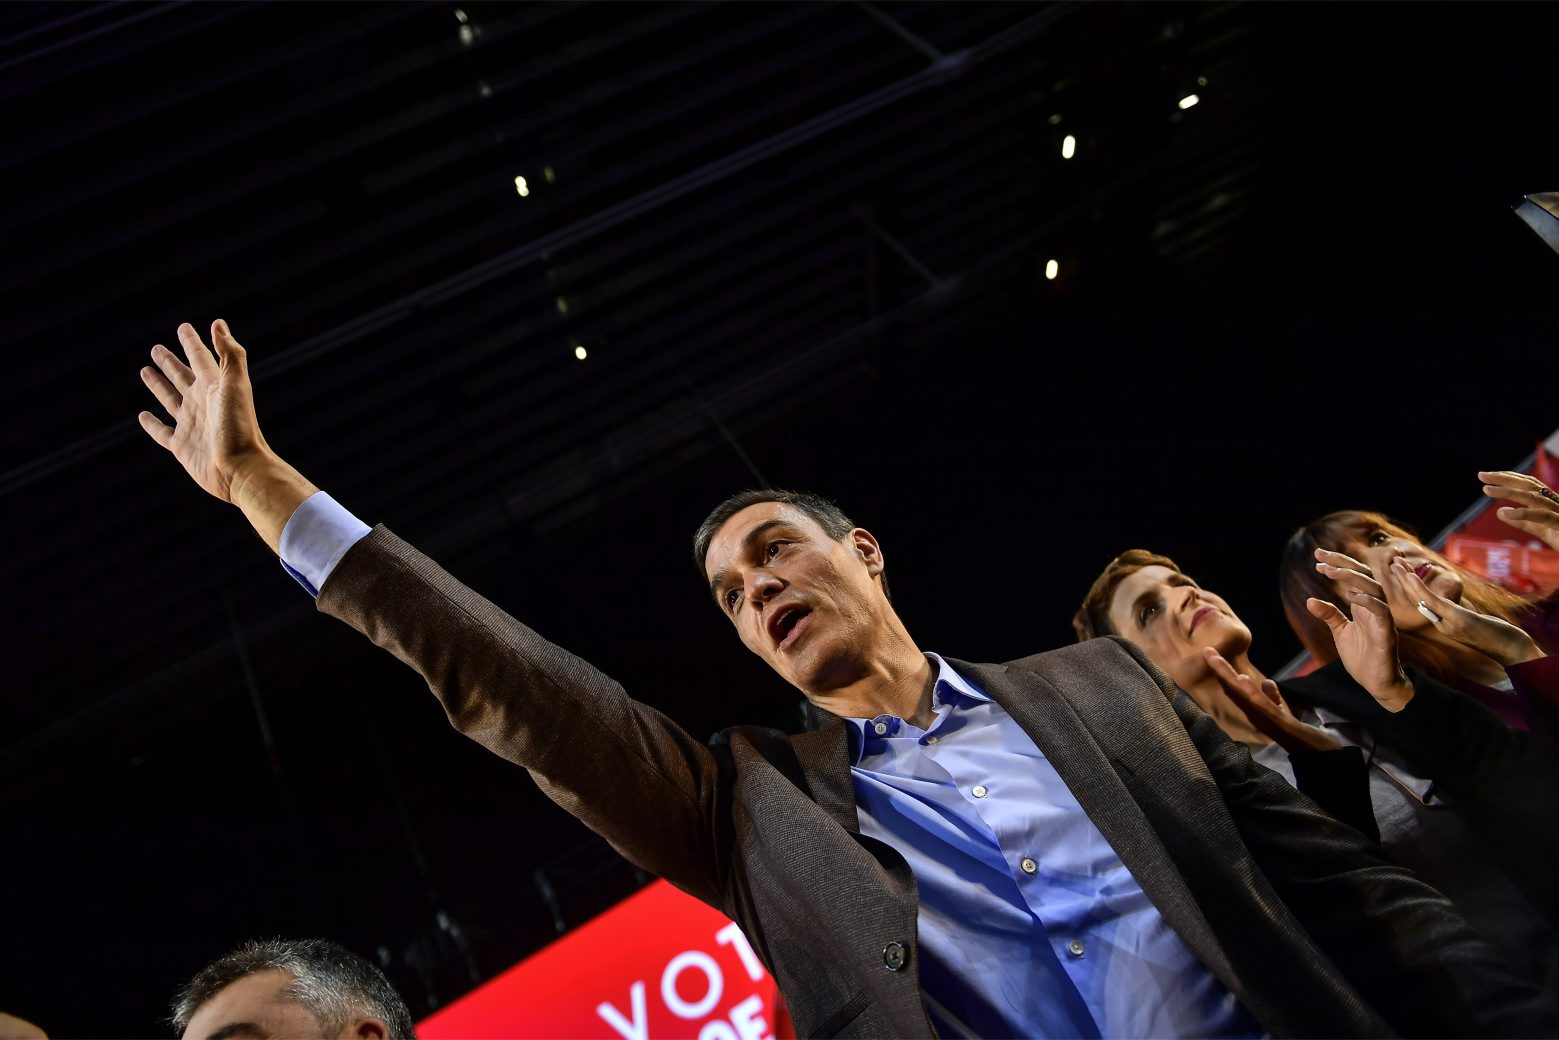 Spanish socialist candidate Pedro Sanchez applauds socialist followers during a General Election campaign rally, in Pamplona, northern Spain, Friday, Nov. 1, 2019. Spain's political parties are set to launch one campaign leading up to a Nov. 10 election. (AP Photo/Alvaro Barrientos)
Pedro Sanchez Spain Elections